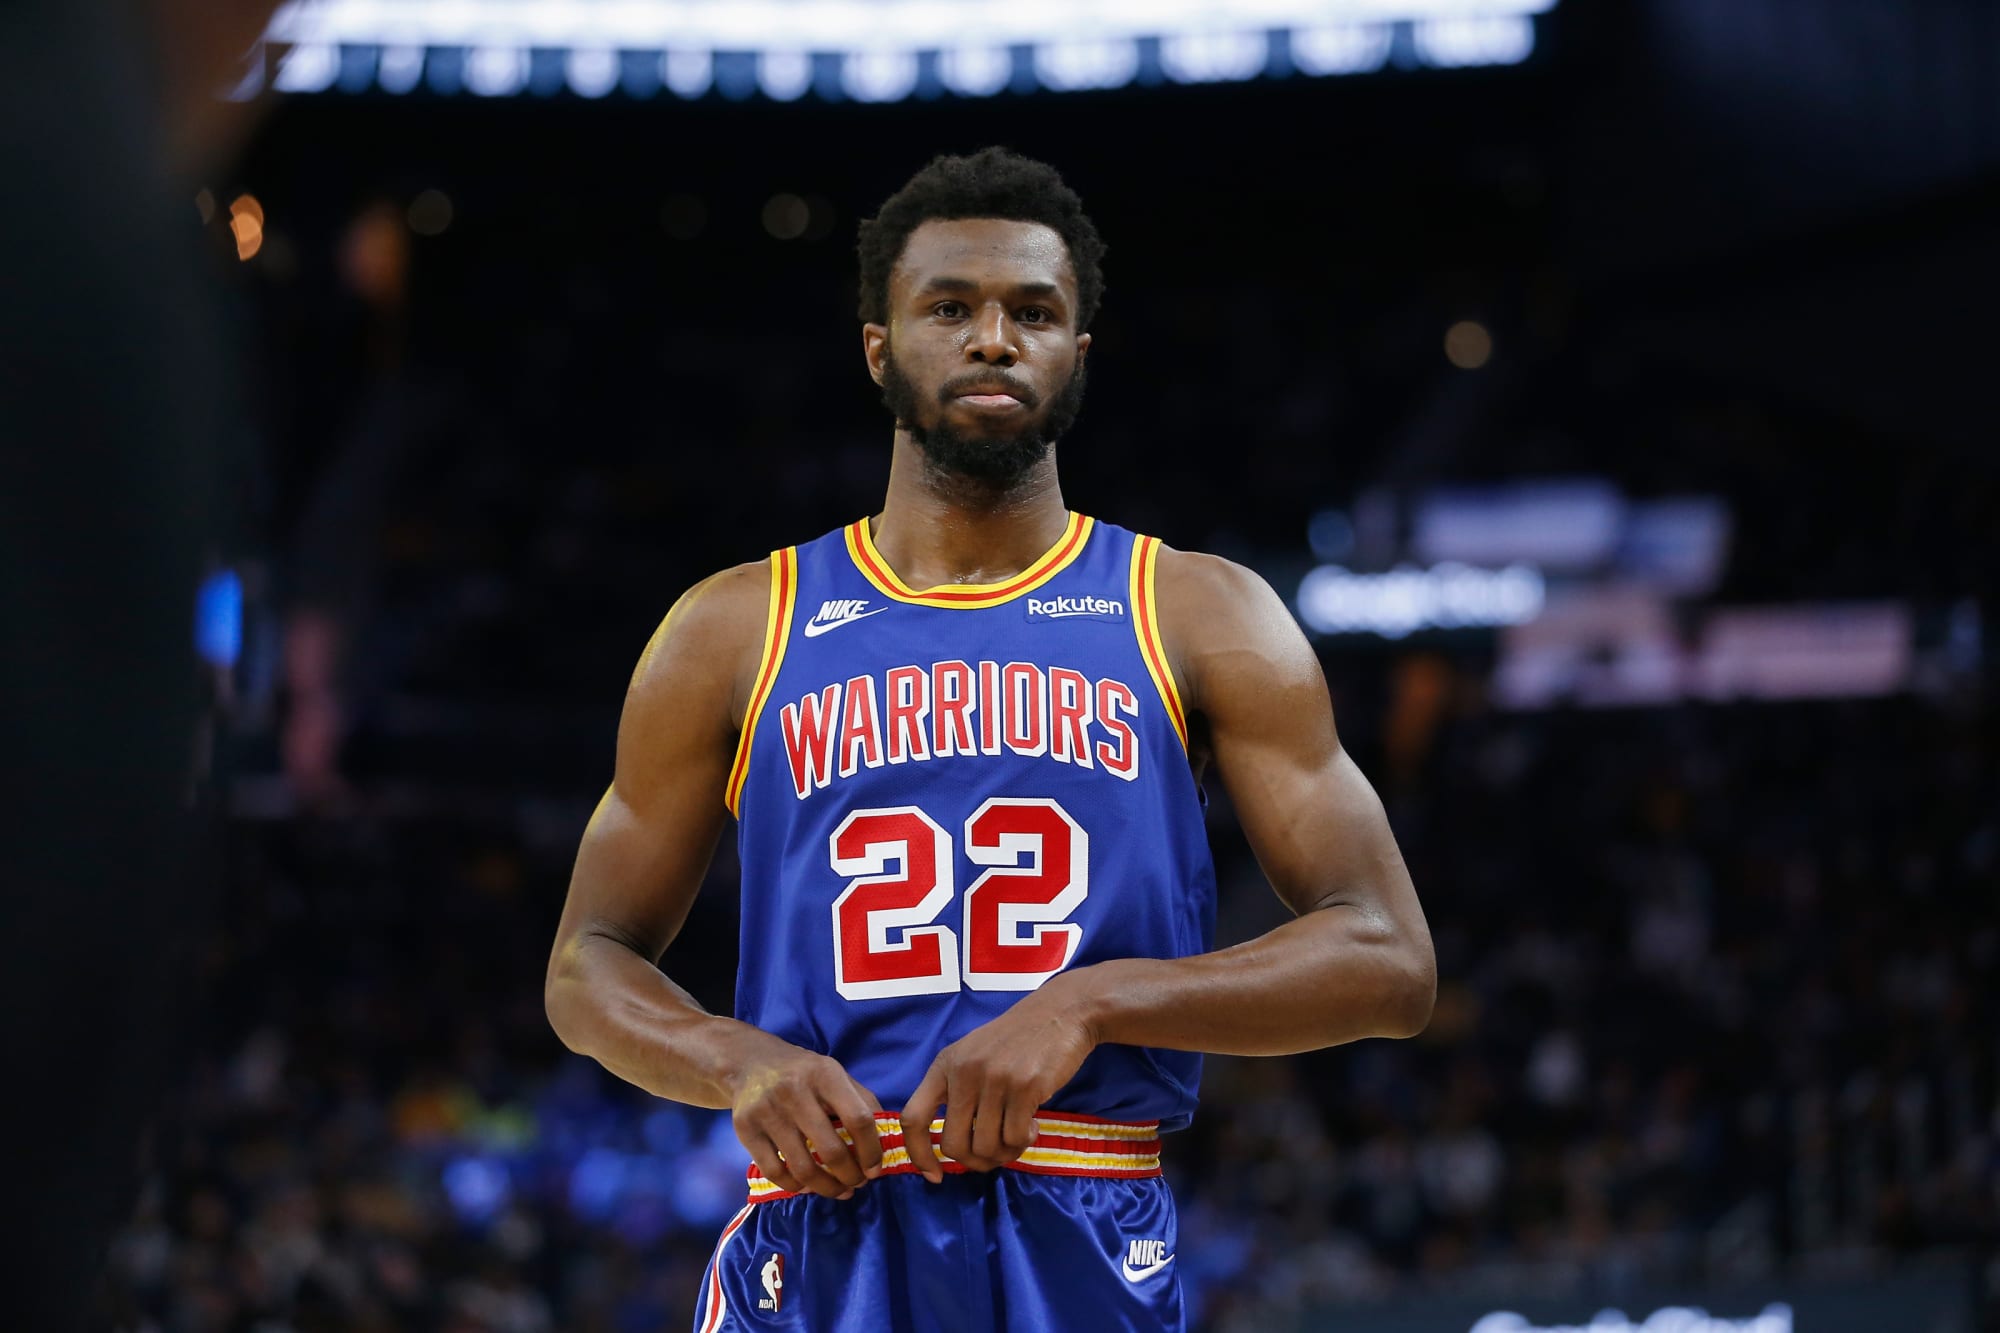 Respect Andrew Wiggins' privacy as he nears return to Warriors